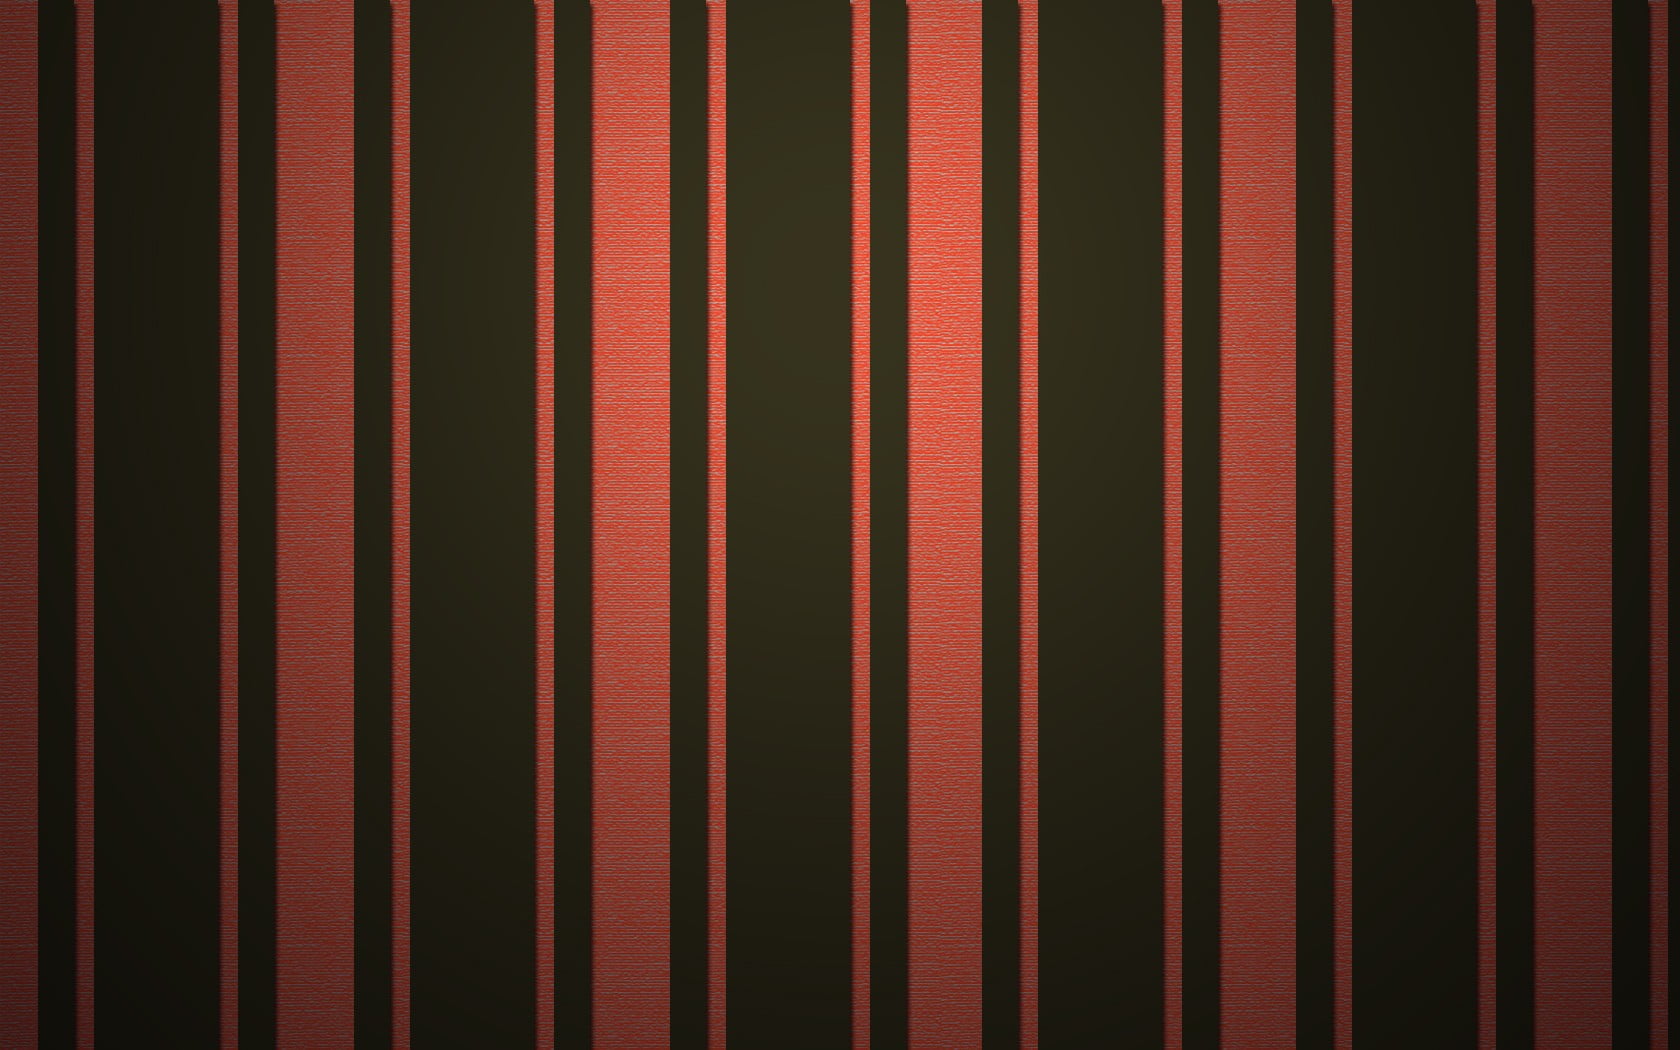 orange and black striped textile, abstract